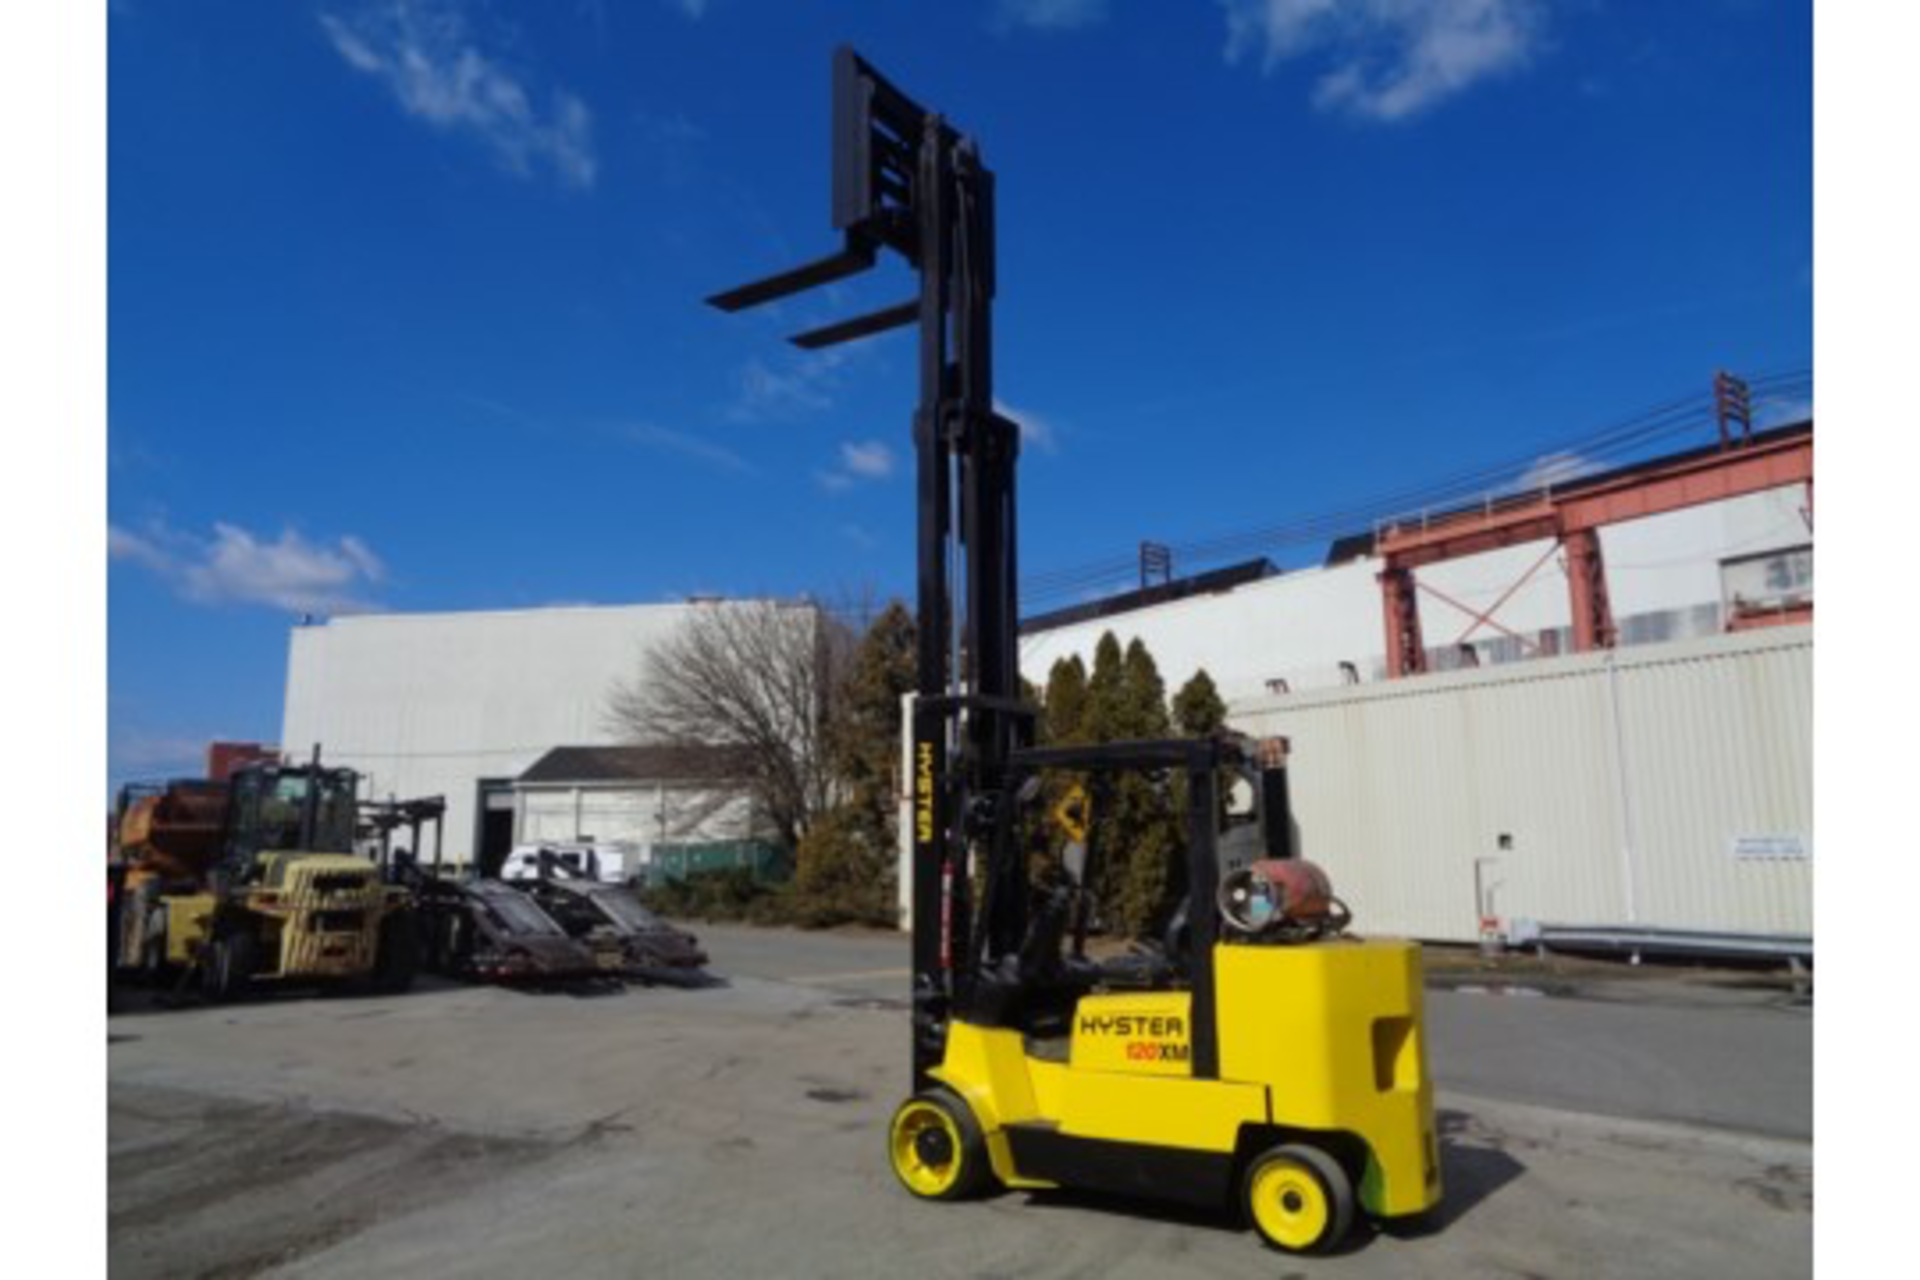 Hyster S120XMS 12,000 lb Forklift - Image 16 of 19